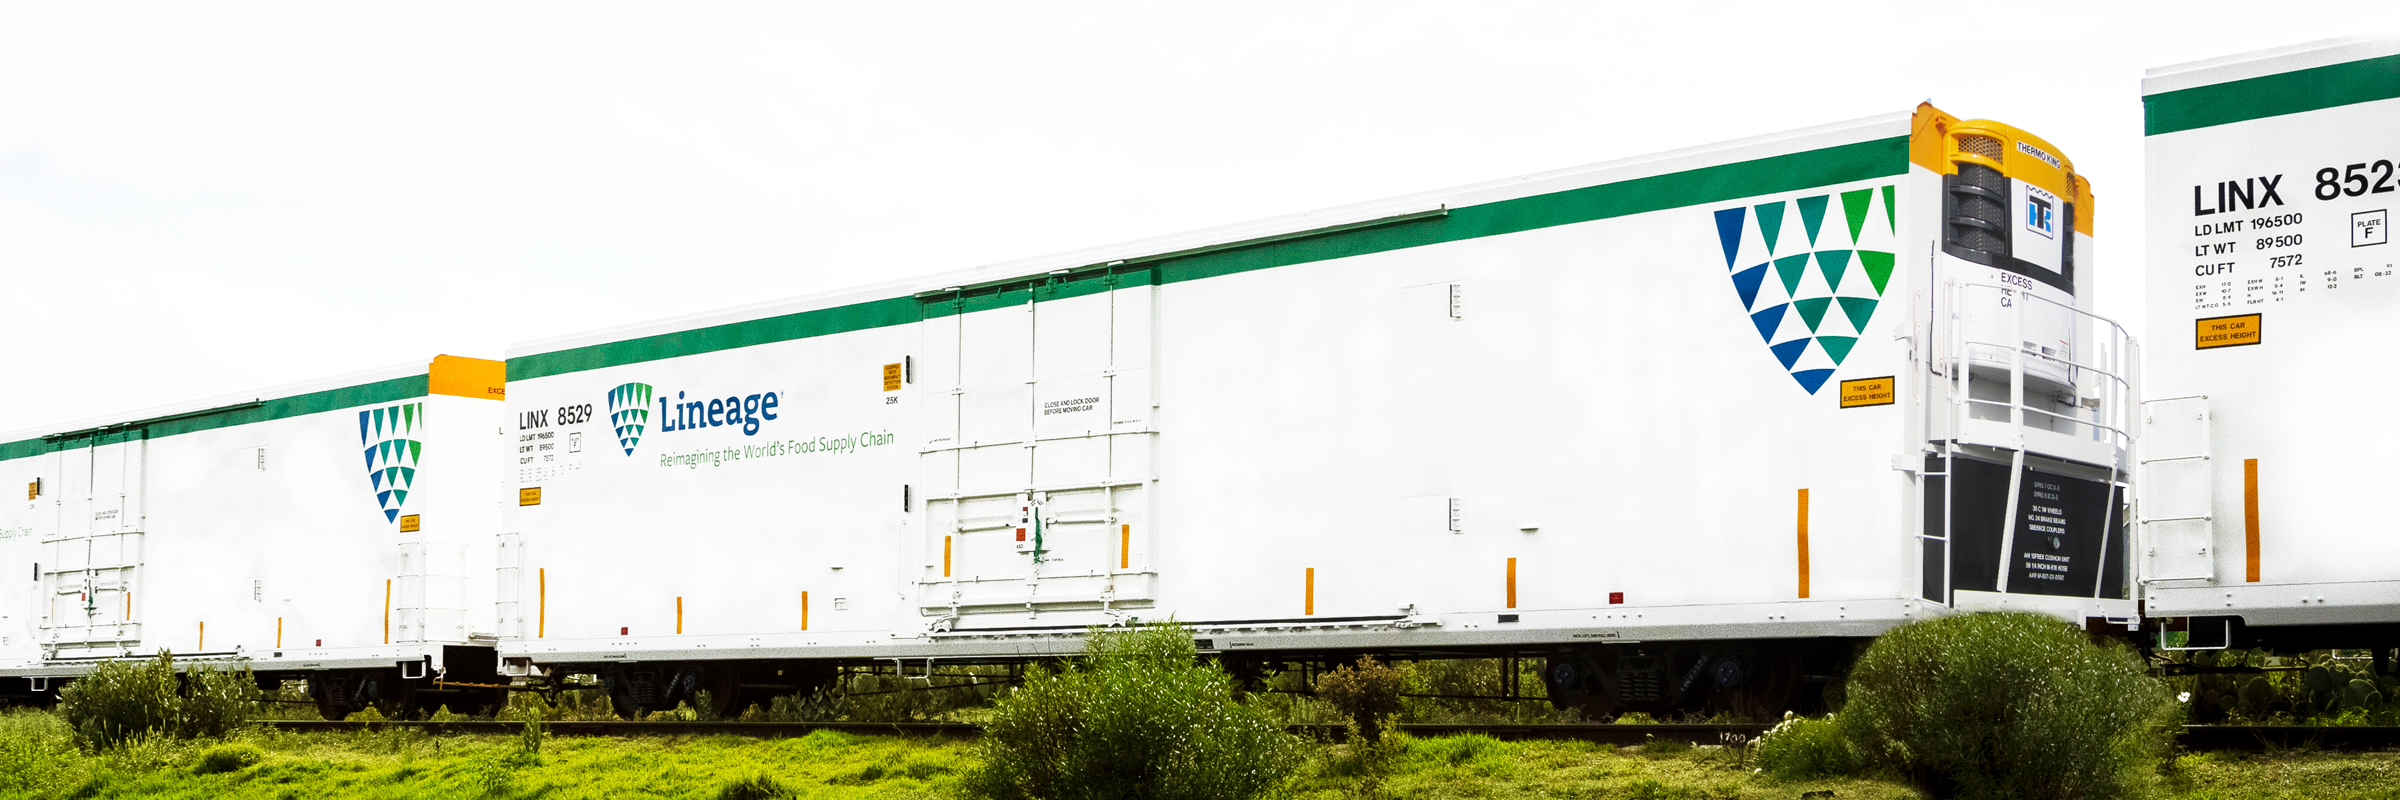 Greenbrier’s 72’-3″ Refrigerated Boxcar ideally suited to transport perishable food items.